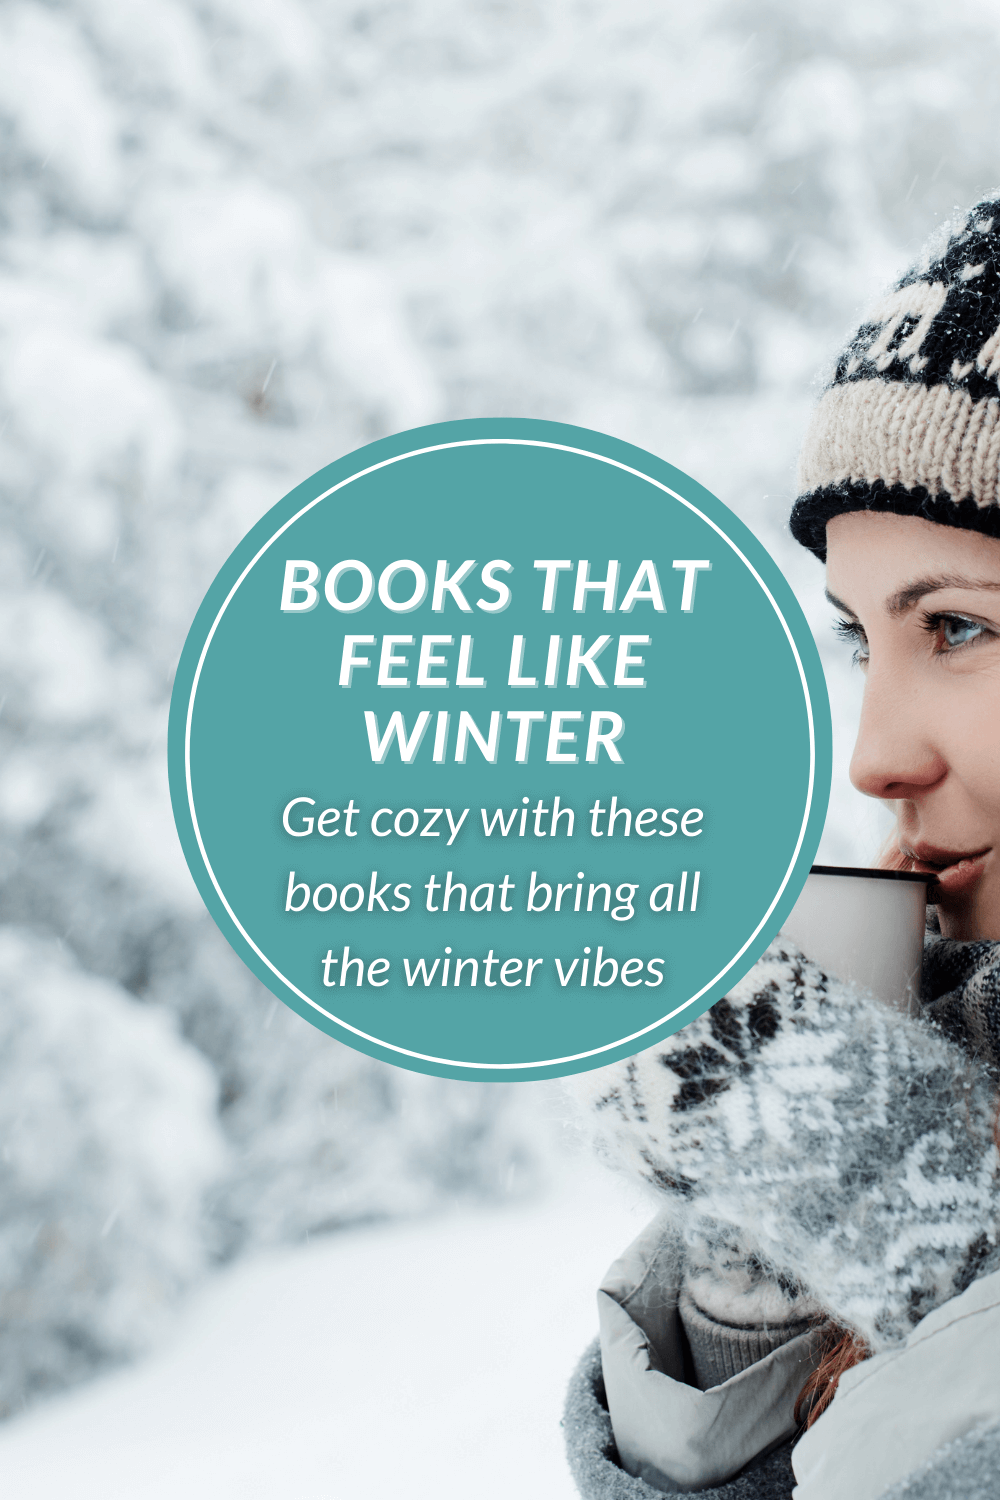 A wintry, snowy outdoor scene with a woman sipping from a mug and looking at the title, Books That Feel Like Winter.